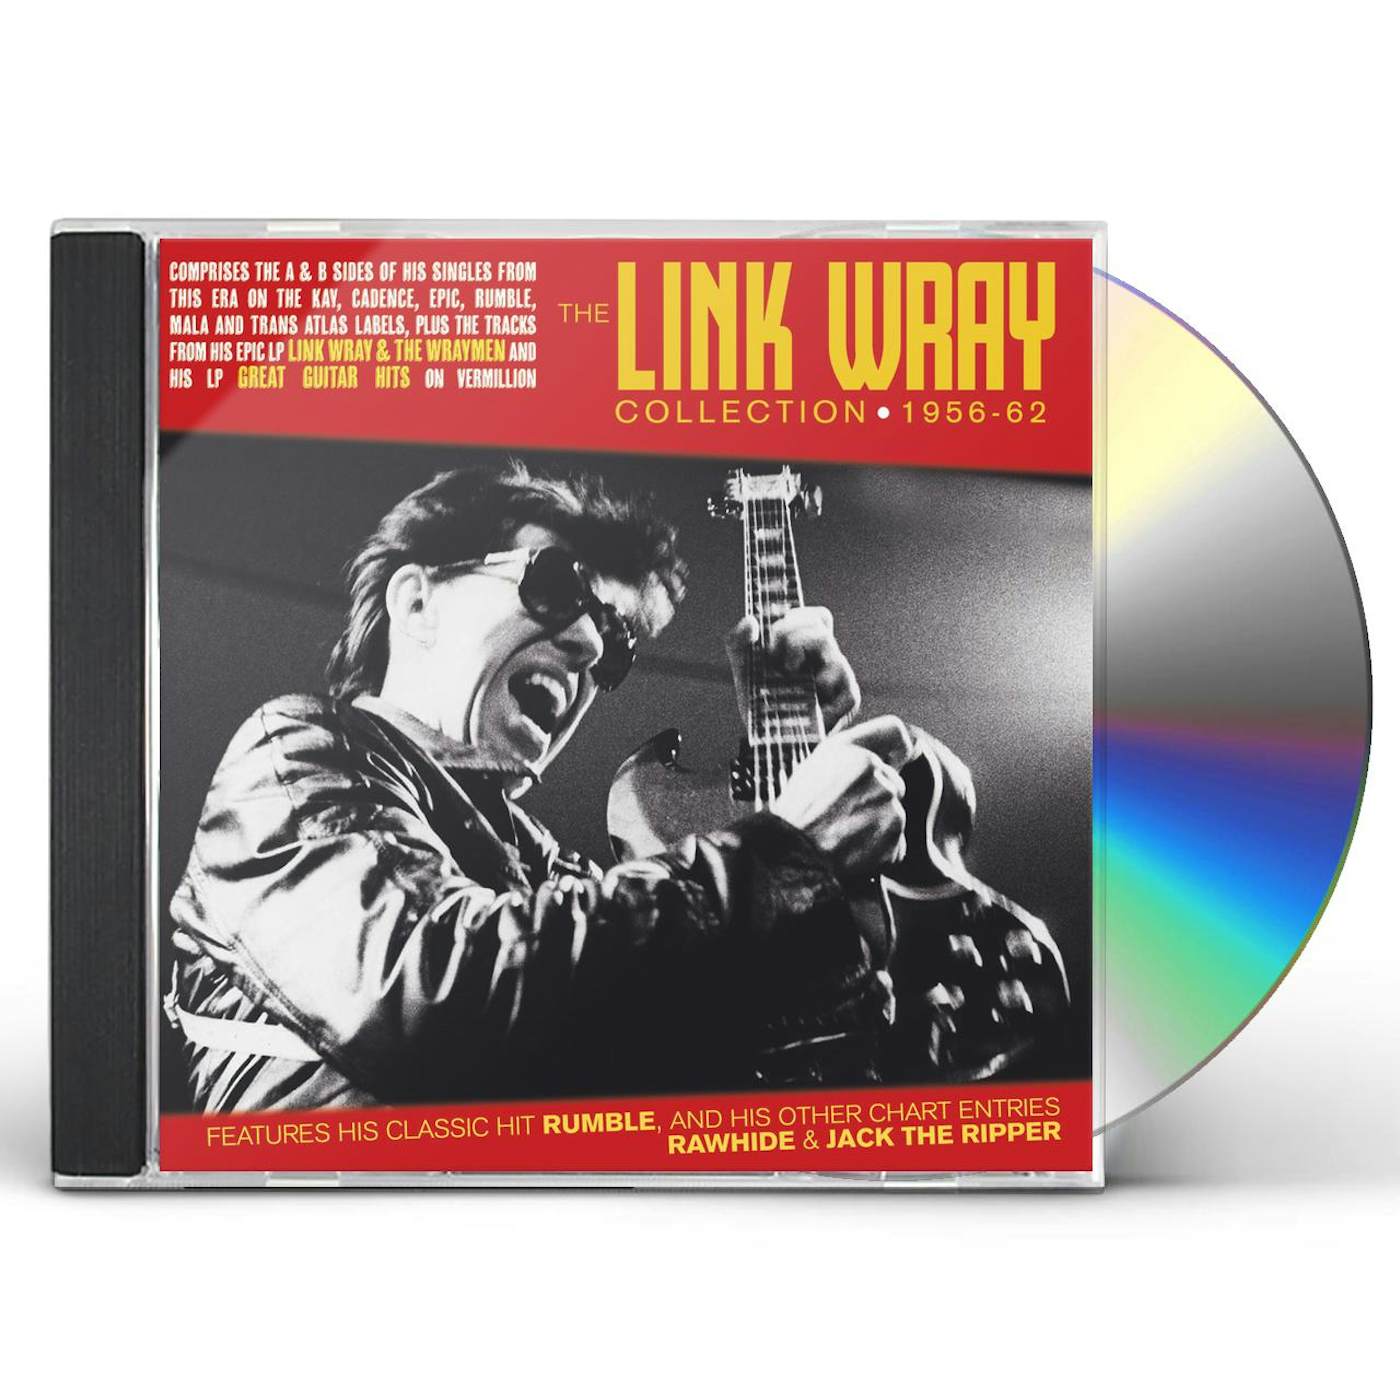 LINK WRAY COLLECTION 1956-62 CD